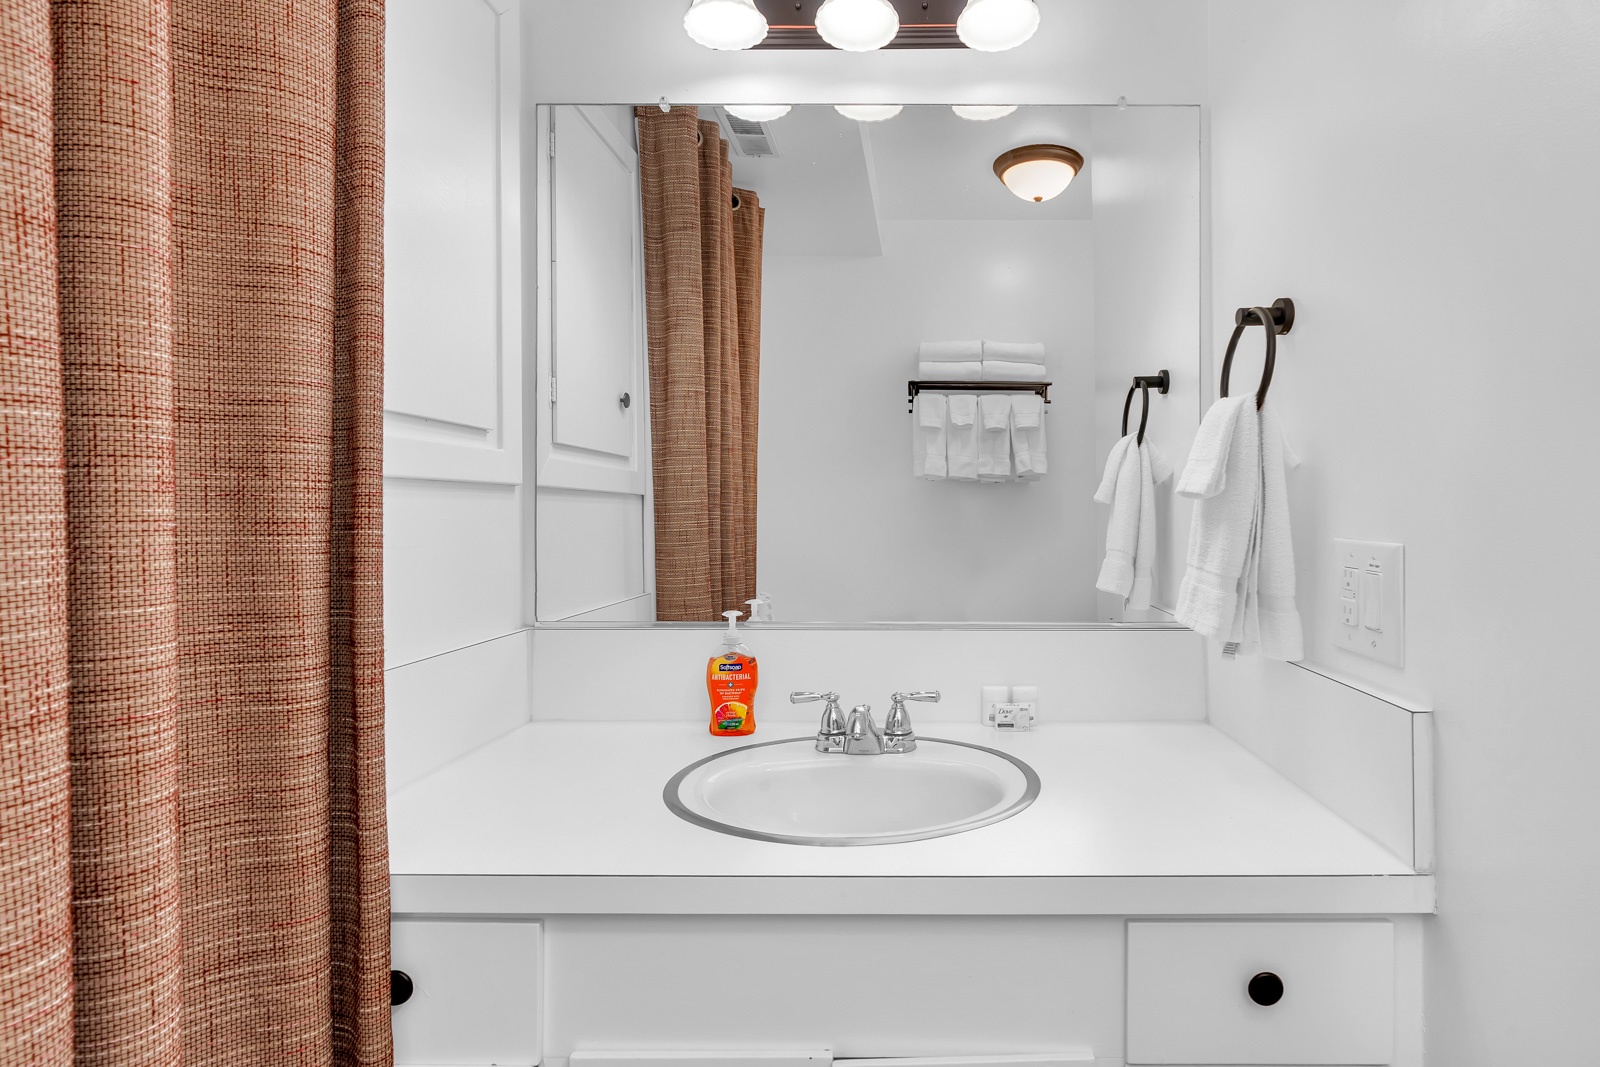 This 1st-floor full bath offers a single vanity & shower